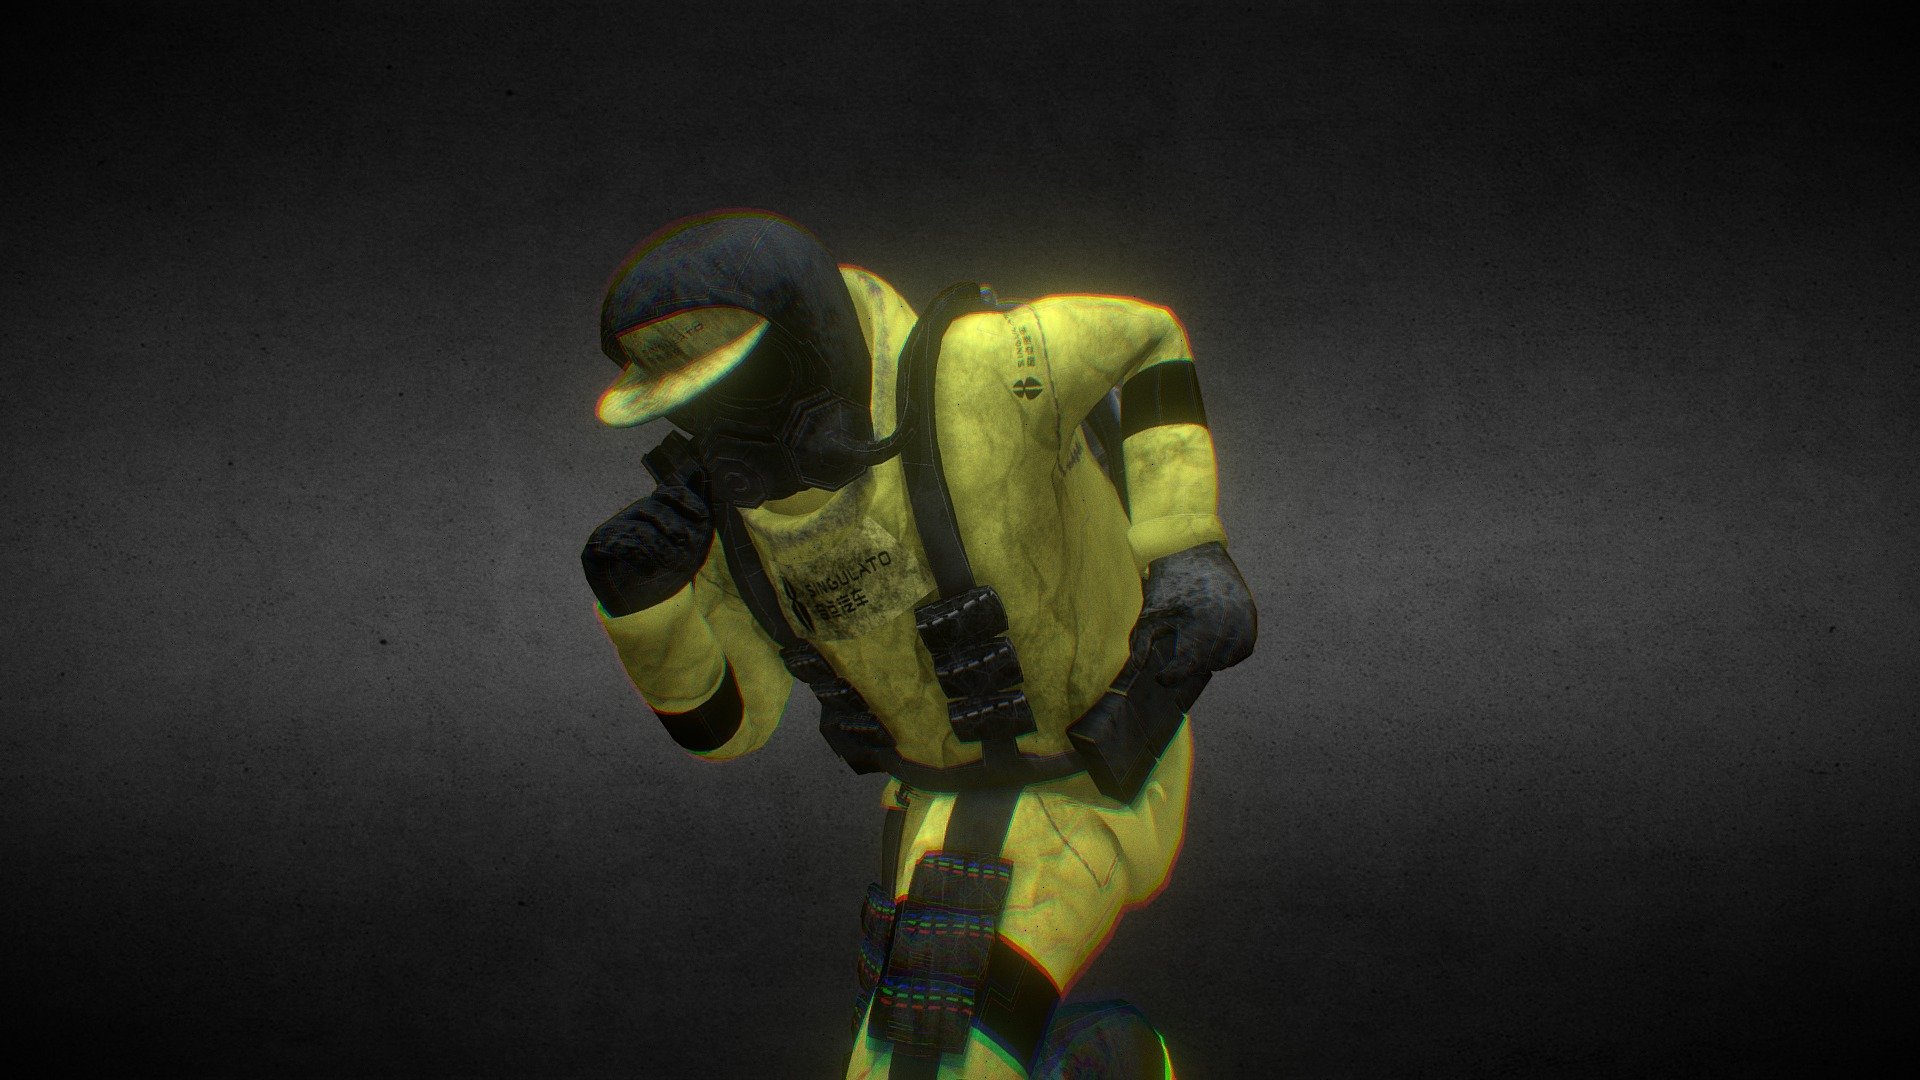 3D Model for a Backrooms Character

Feel free to use this model for anything, make sure to credit me.

What are the Backrooms?
https://backrooms.fandom.com/wiki/Backrooms_Wiki - Backrooms Rigged Hazmat - Download Free 3D model by Loco (@Loco420) 3d model